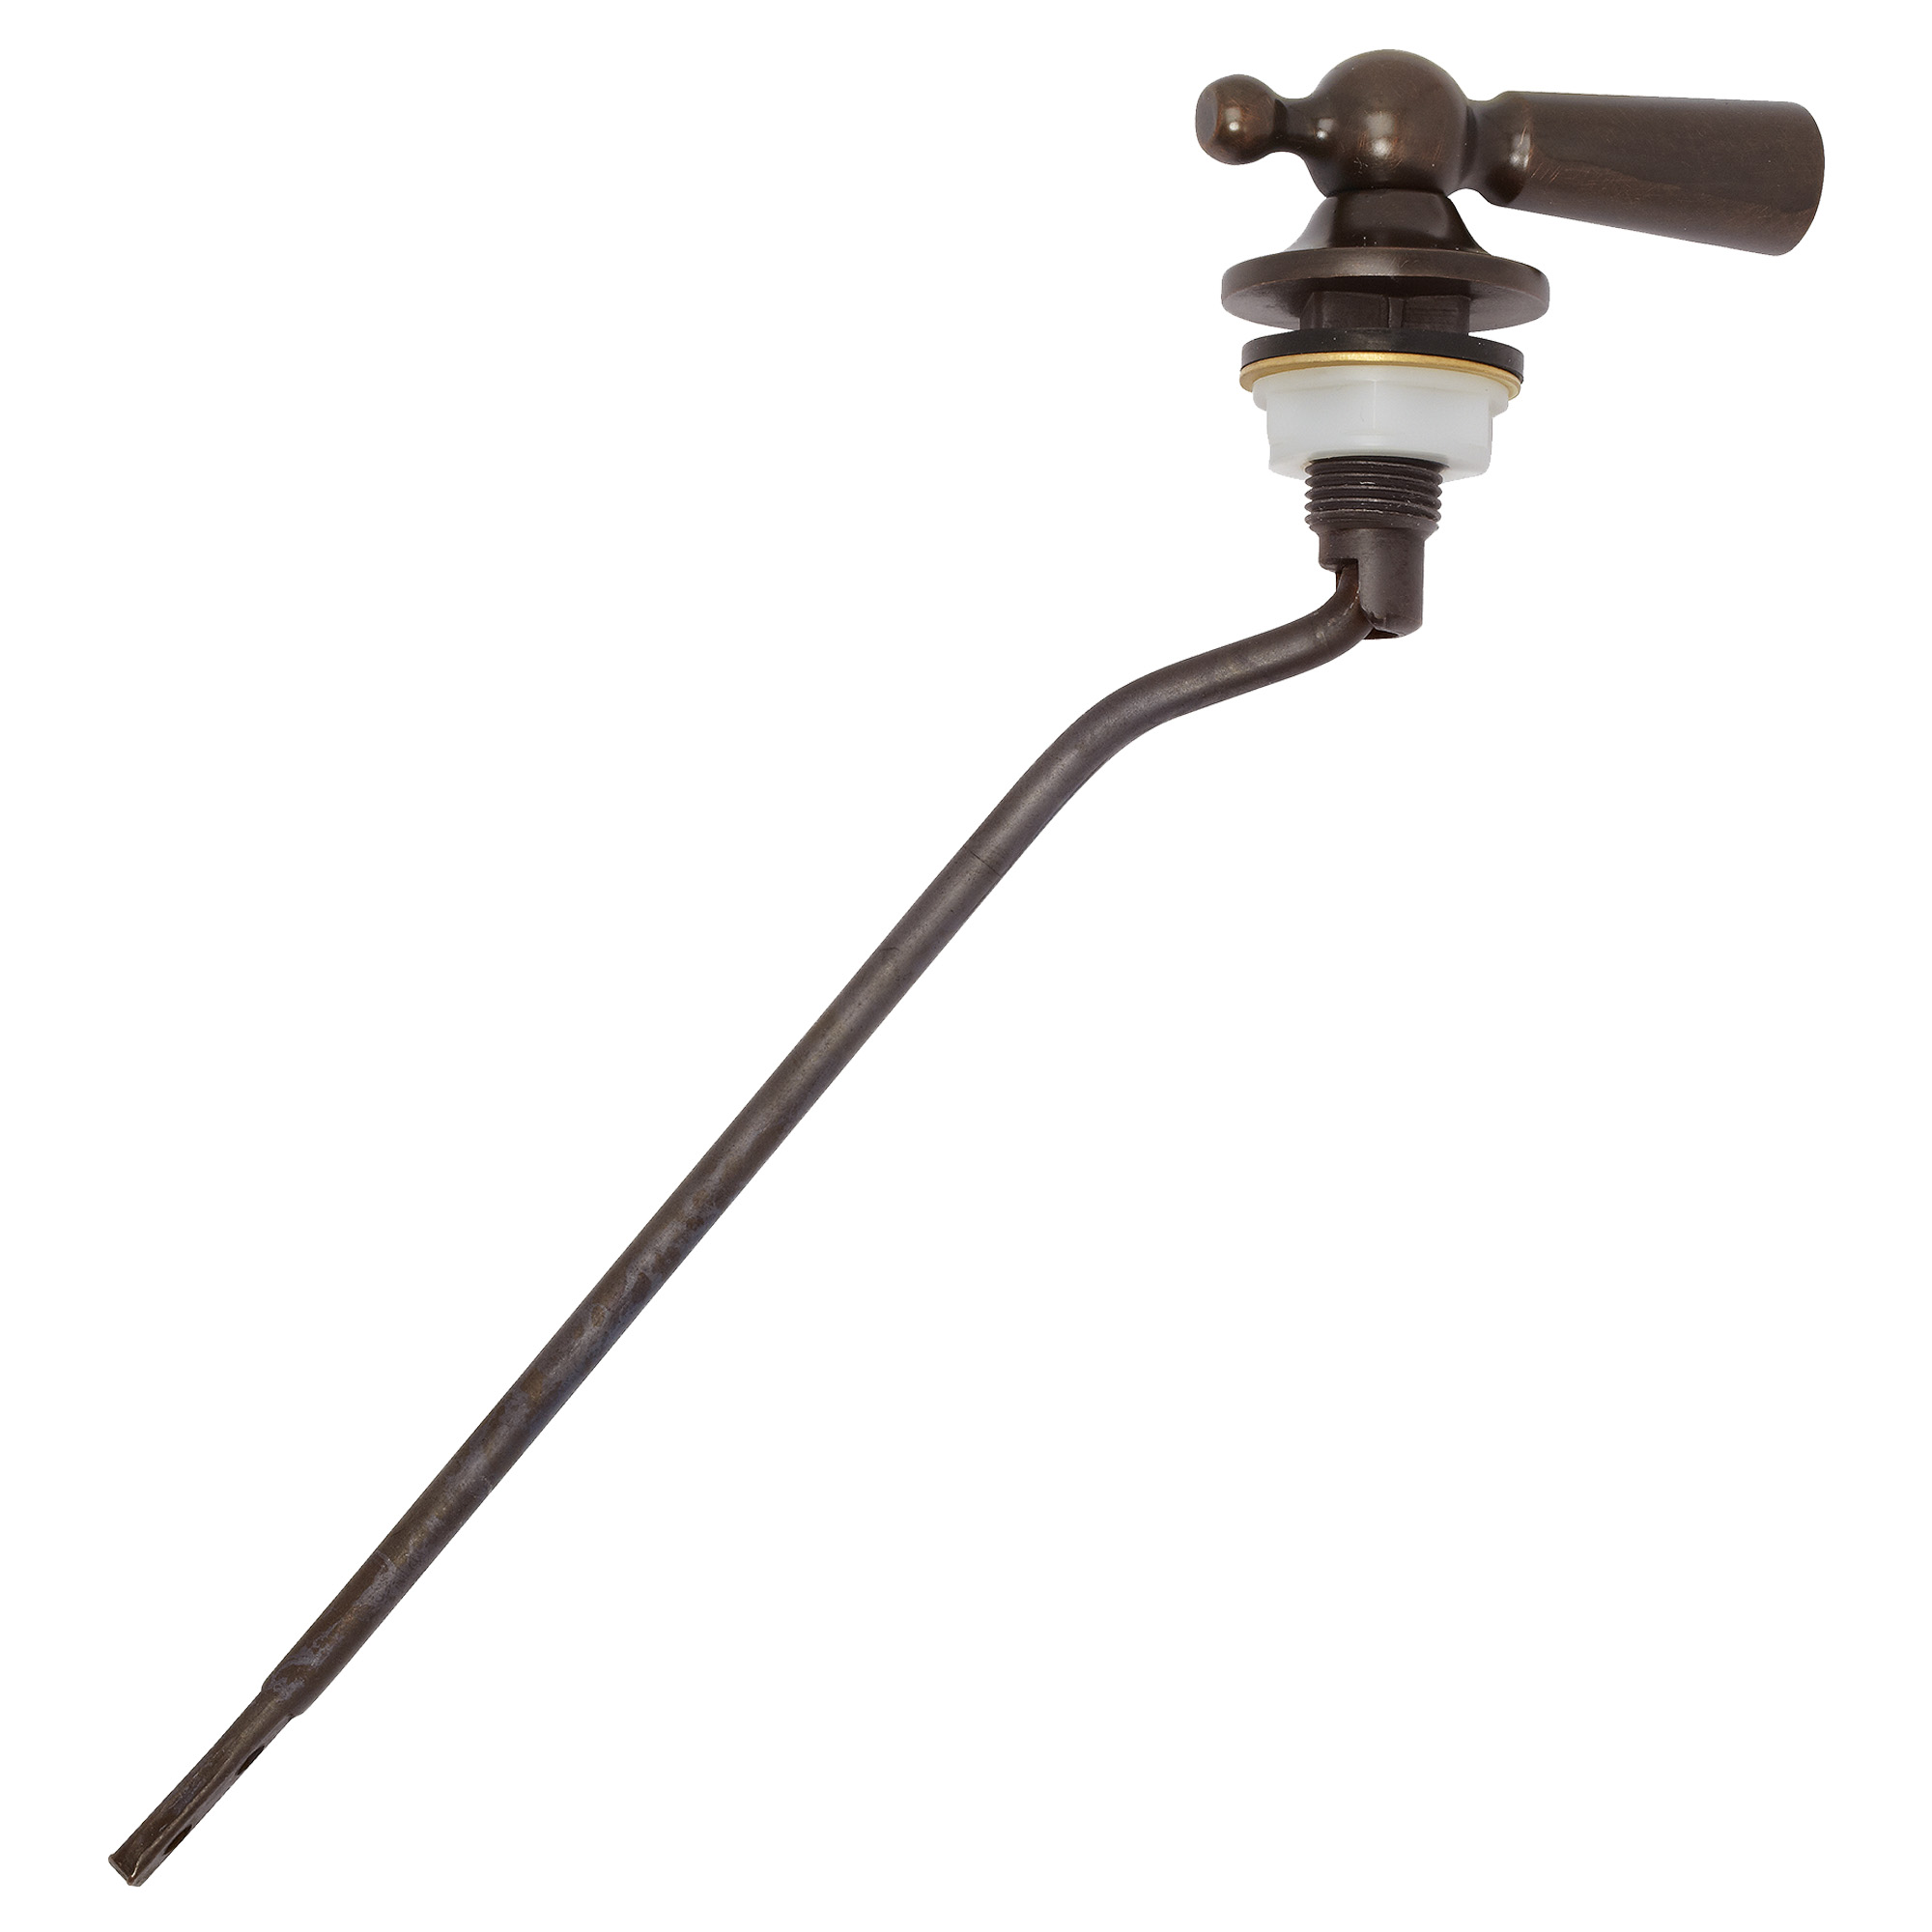 Heritage Left Hand Toilet Trip Lever Assembly